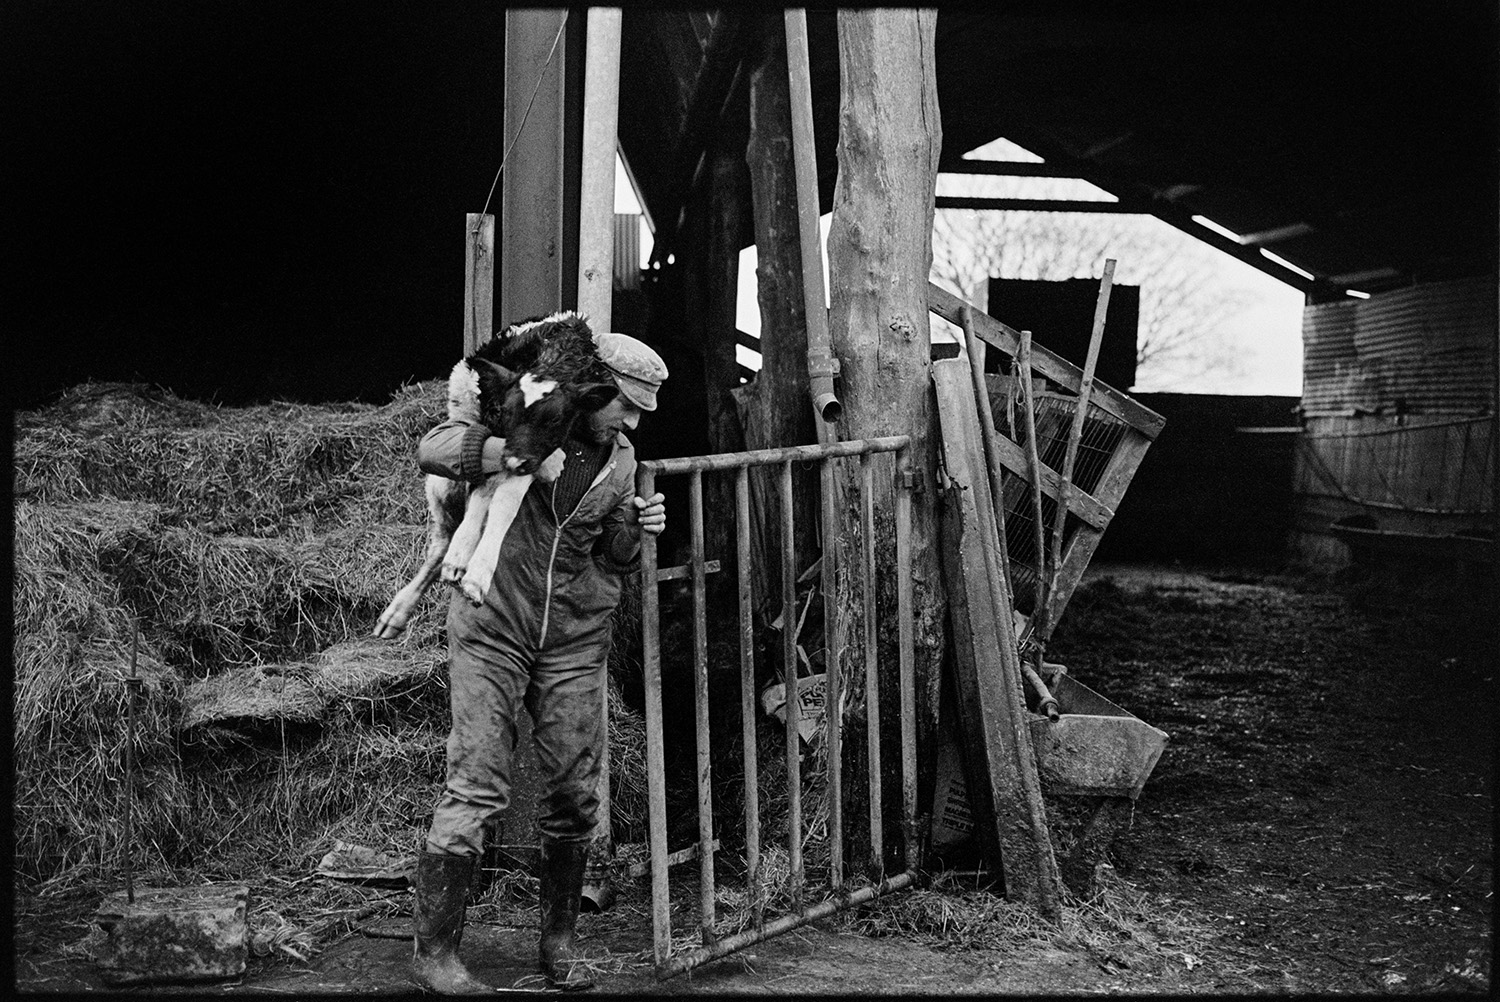 Farmers feeding cows, checking new born calves. 
[Simon Berry carrying a calf into a barn at South Harepath, Beaford. He is closing or opening a metal gate. Hay bales are visible in the barn behind him.]